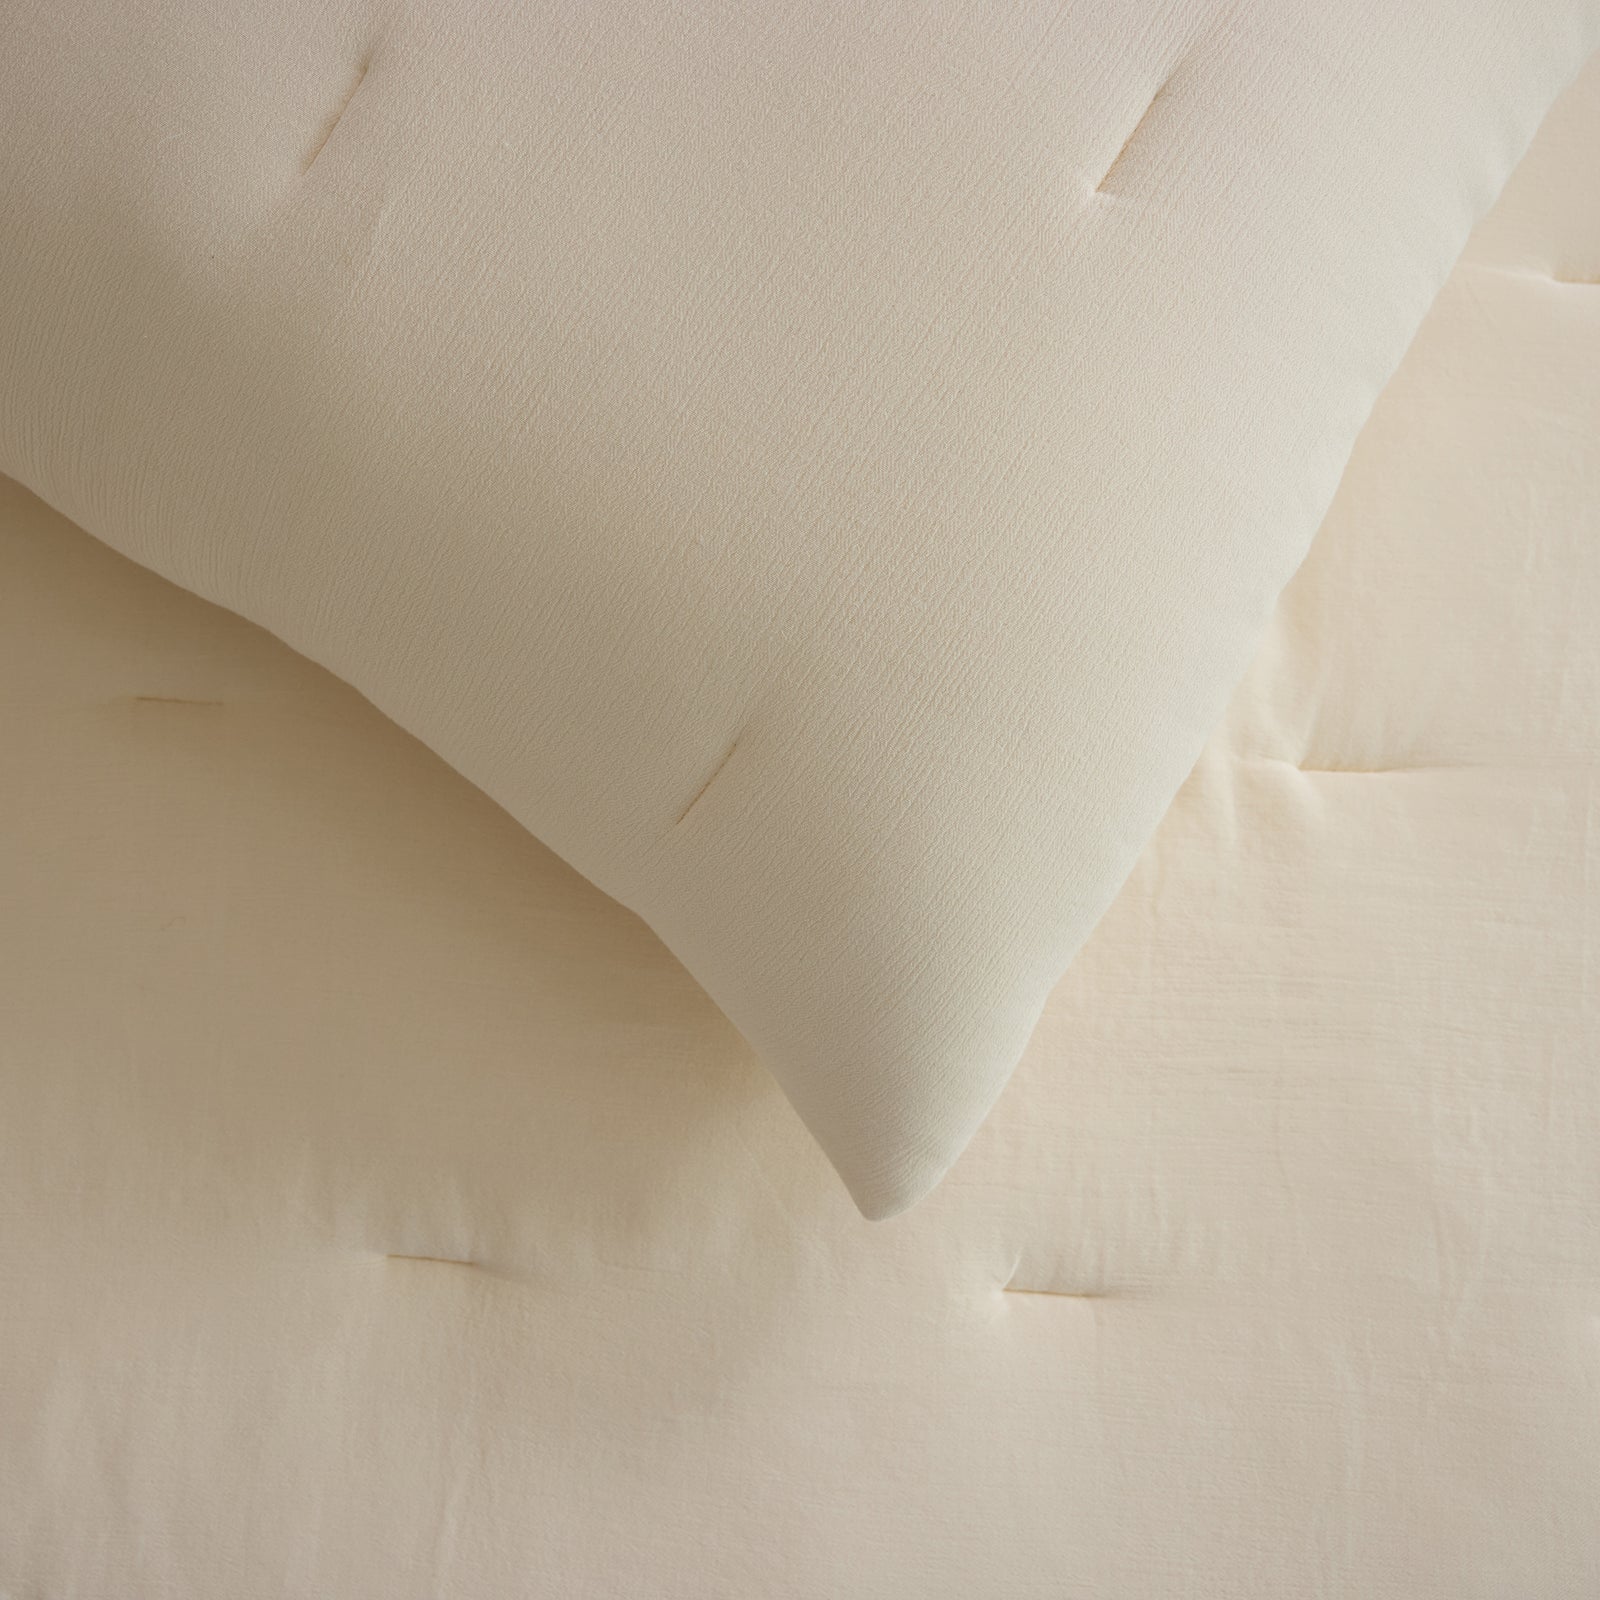 Buttermilk Aire Bamboo Puckered Quilt. The Quilt has been photographed while on a bed in a home bedroom. The quilt was photographed close up so to show the texture of the material.